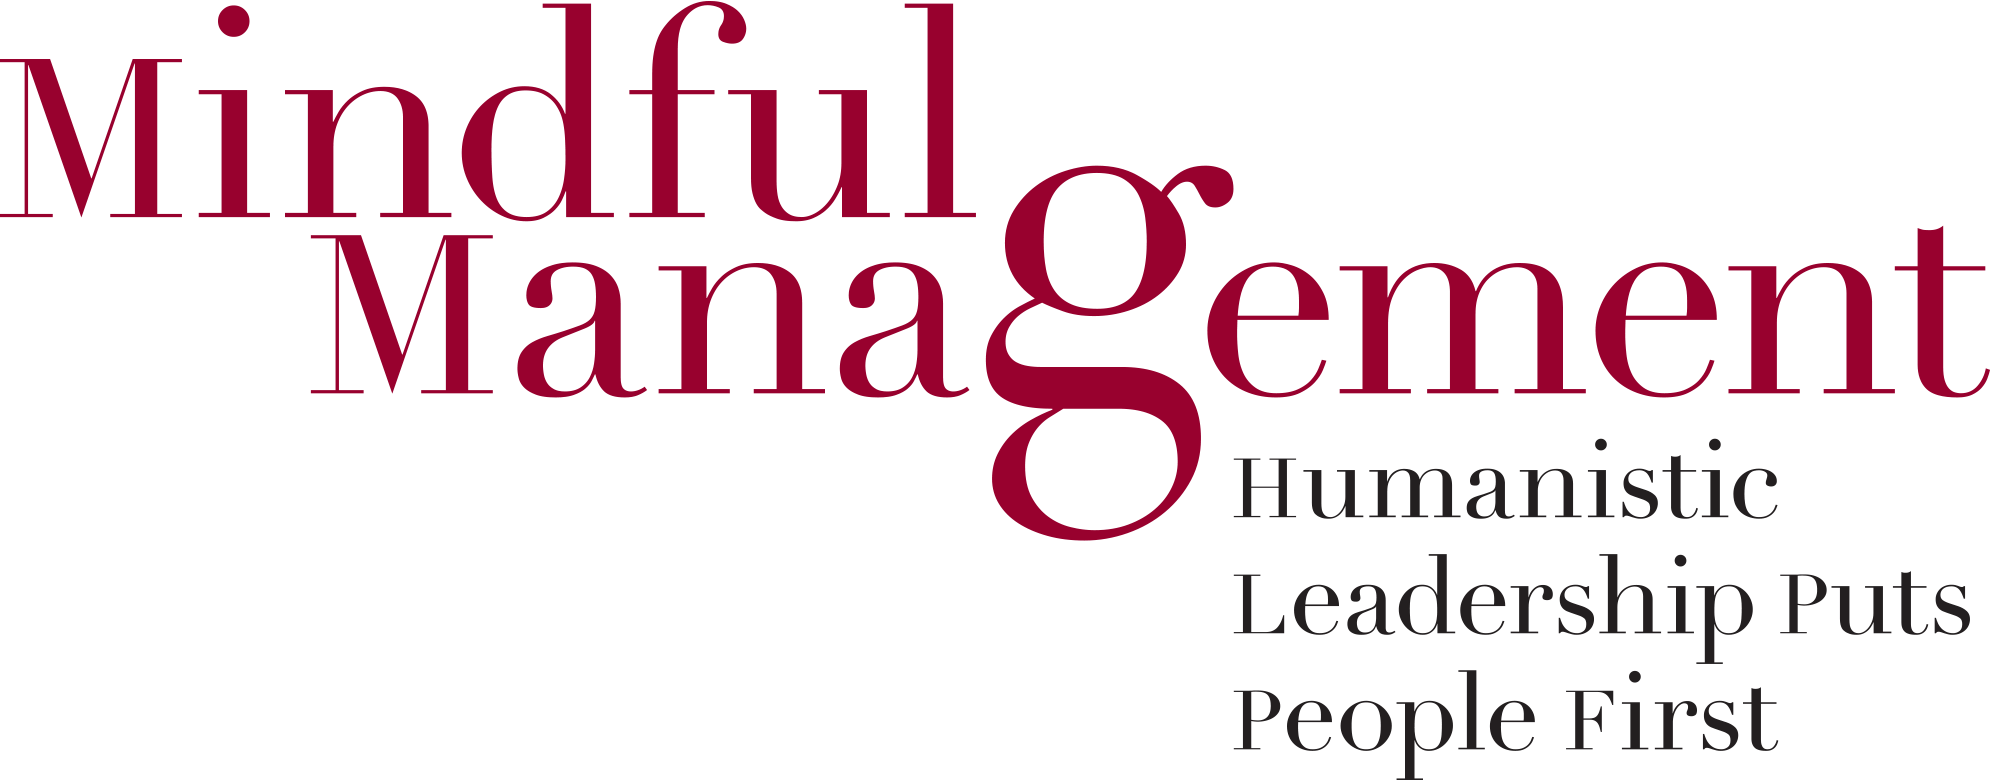 Humanistic Leadership Puts People First